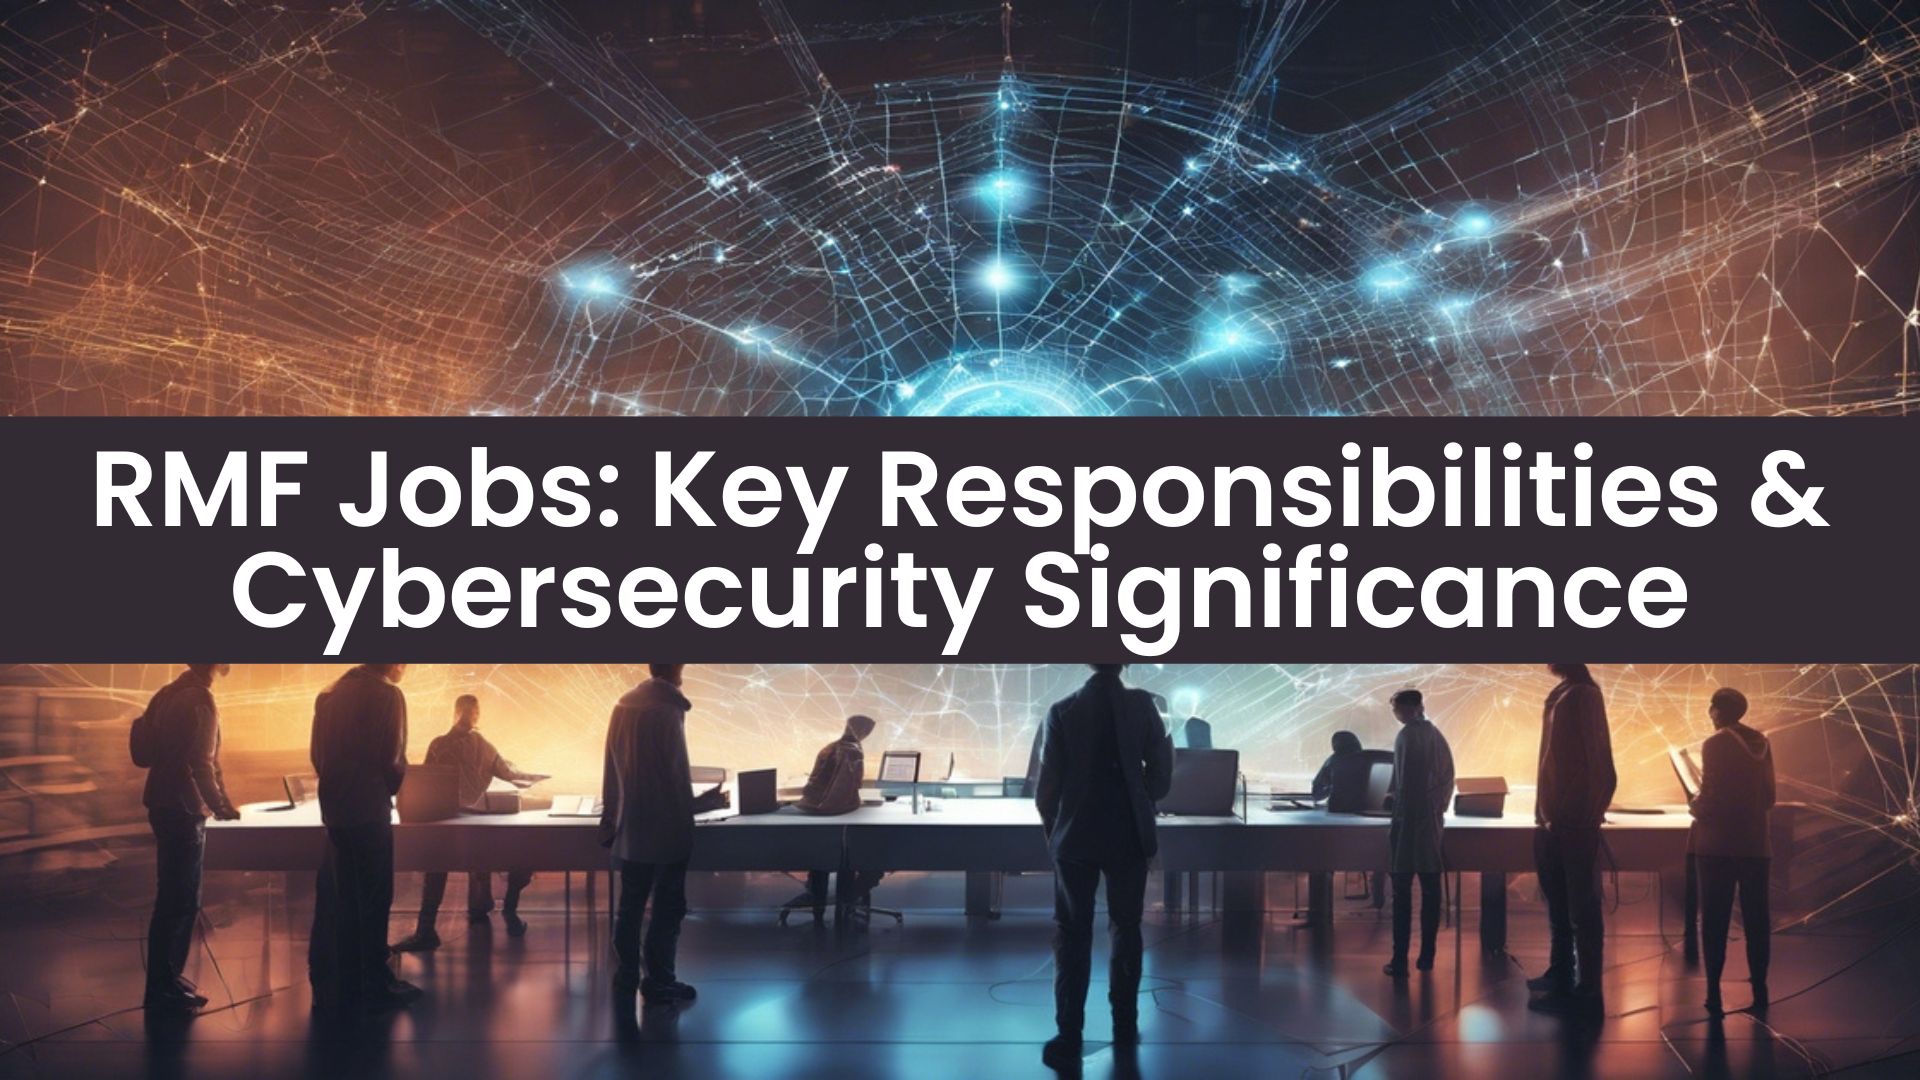 RMF Jobs Key Responsibilities & Cybersecurity Significance